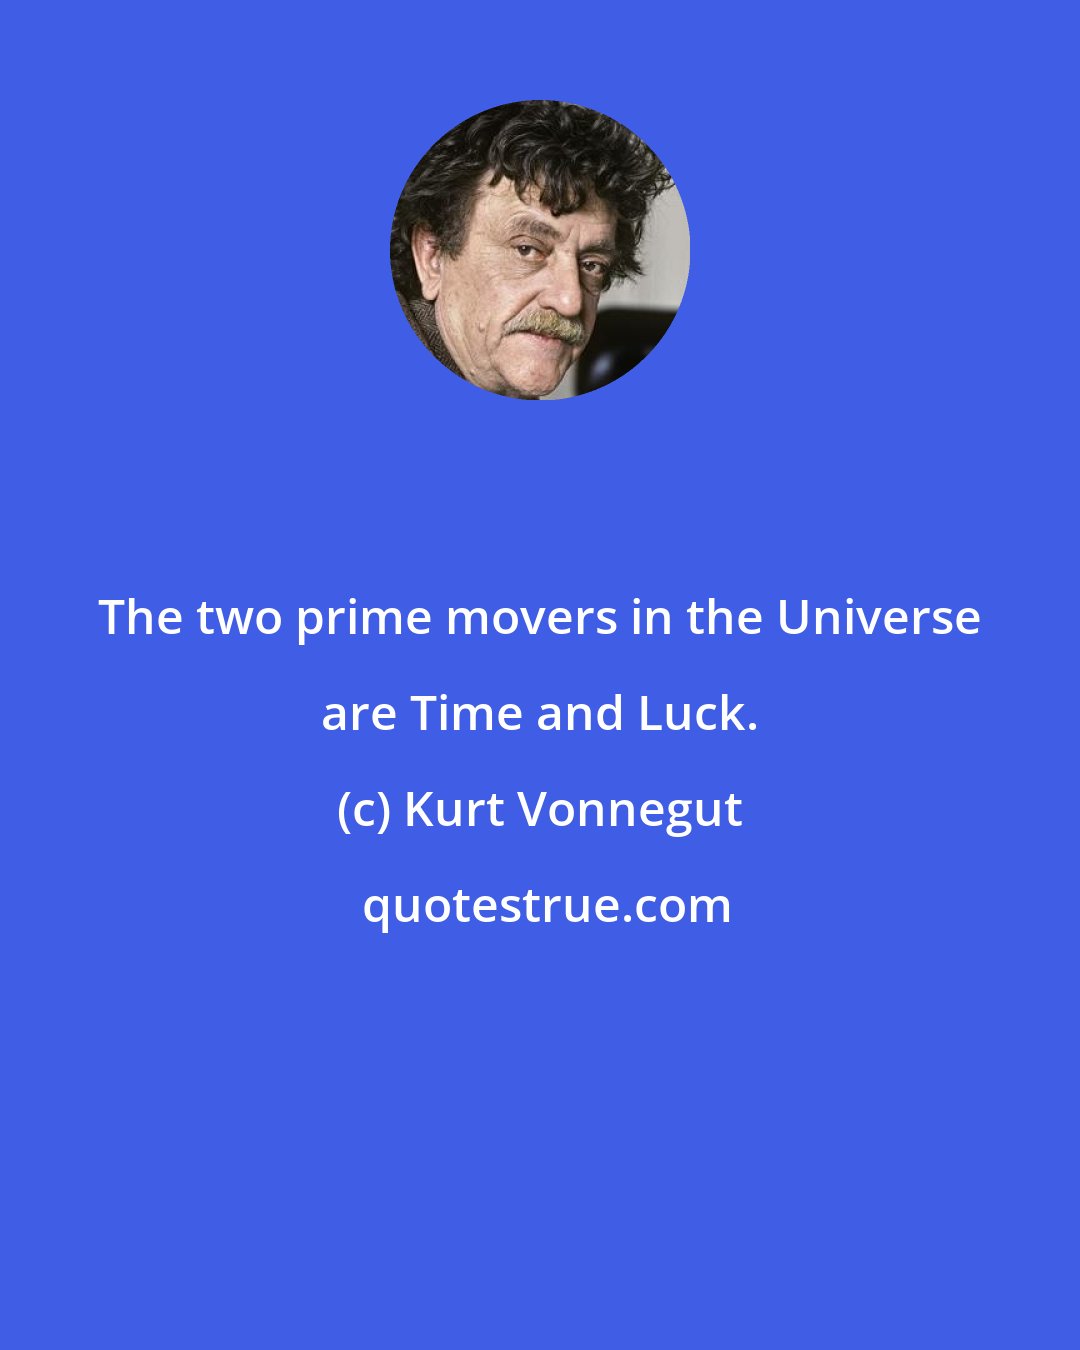 Kurt Vonnegut: The two prime movers in the Universe are Time and Luck.